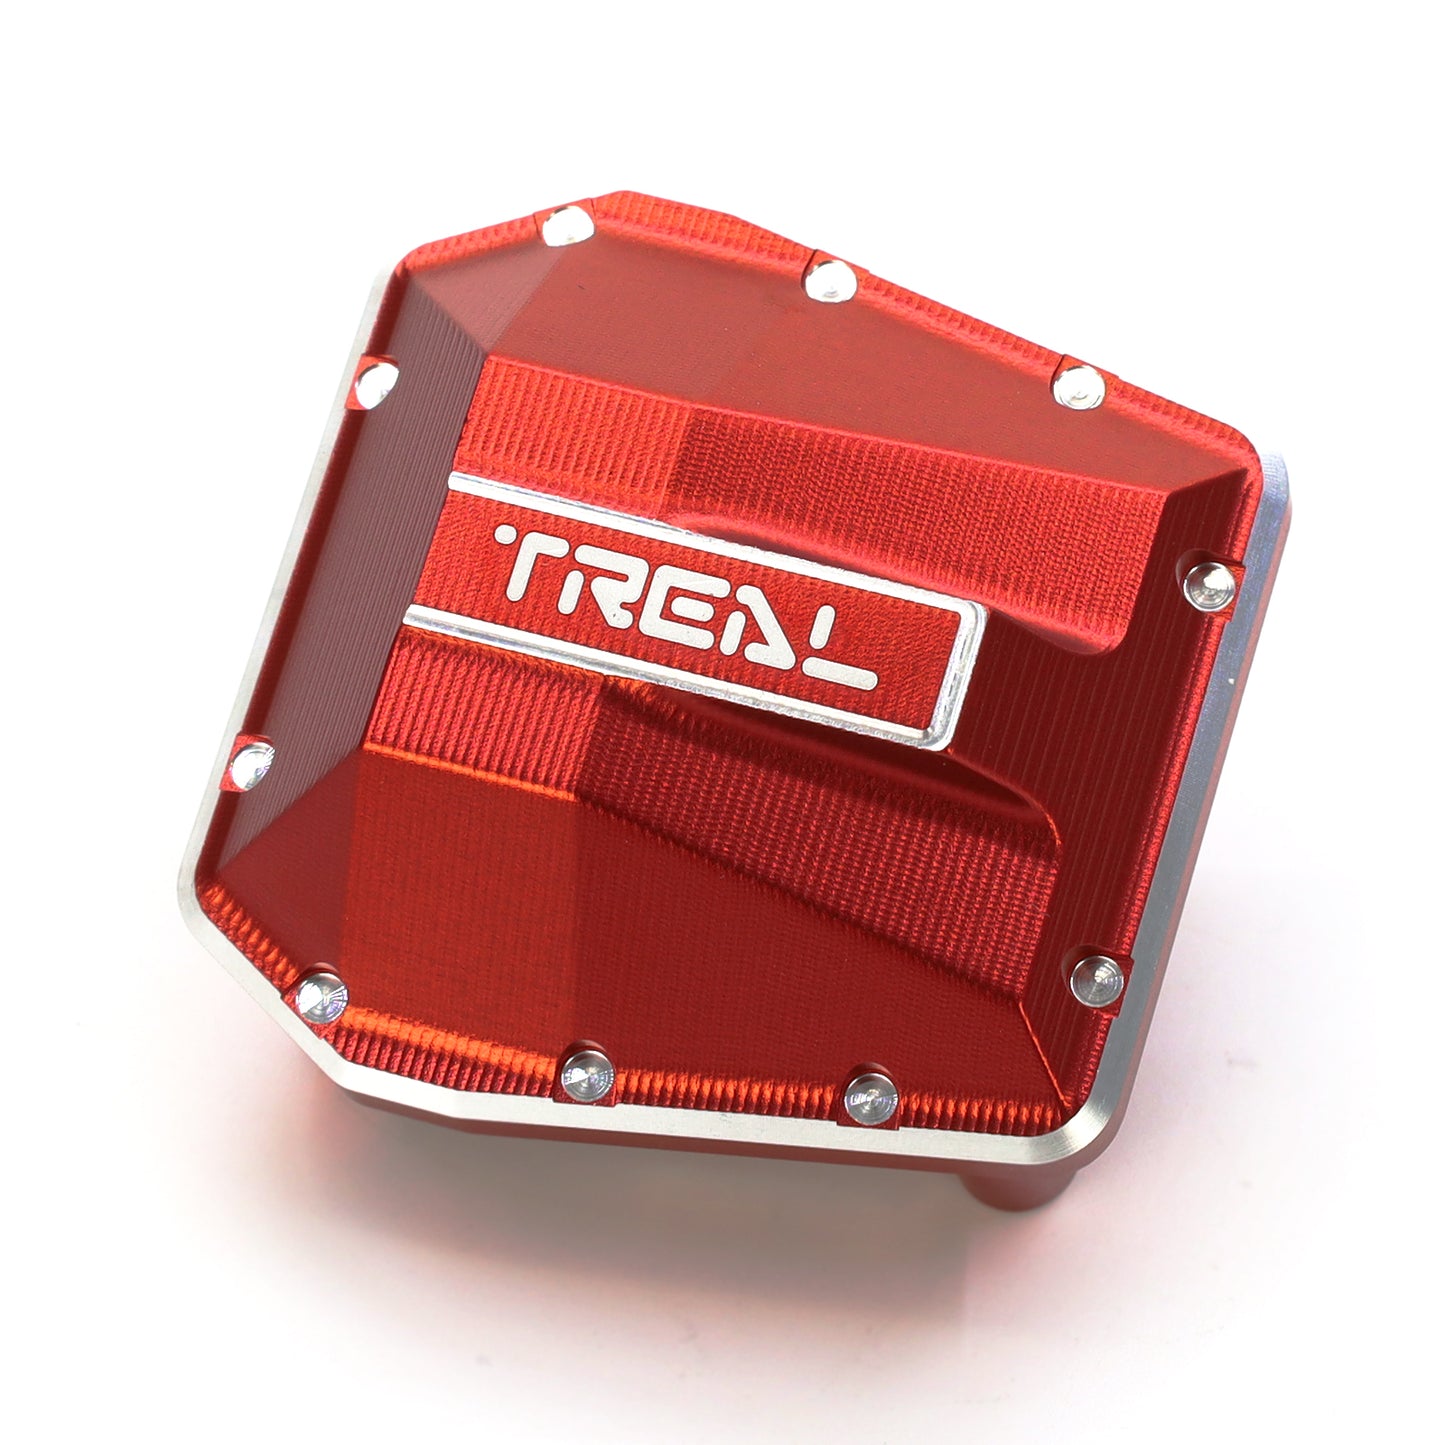 TREAL Alu 7075 Diff Cover for SCX6 Front and Rear Axles